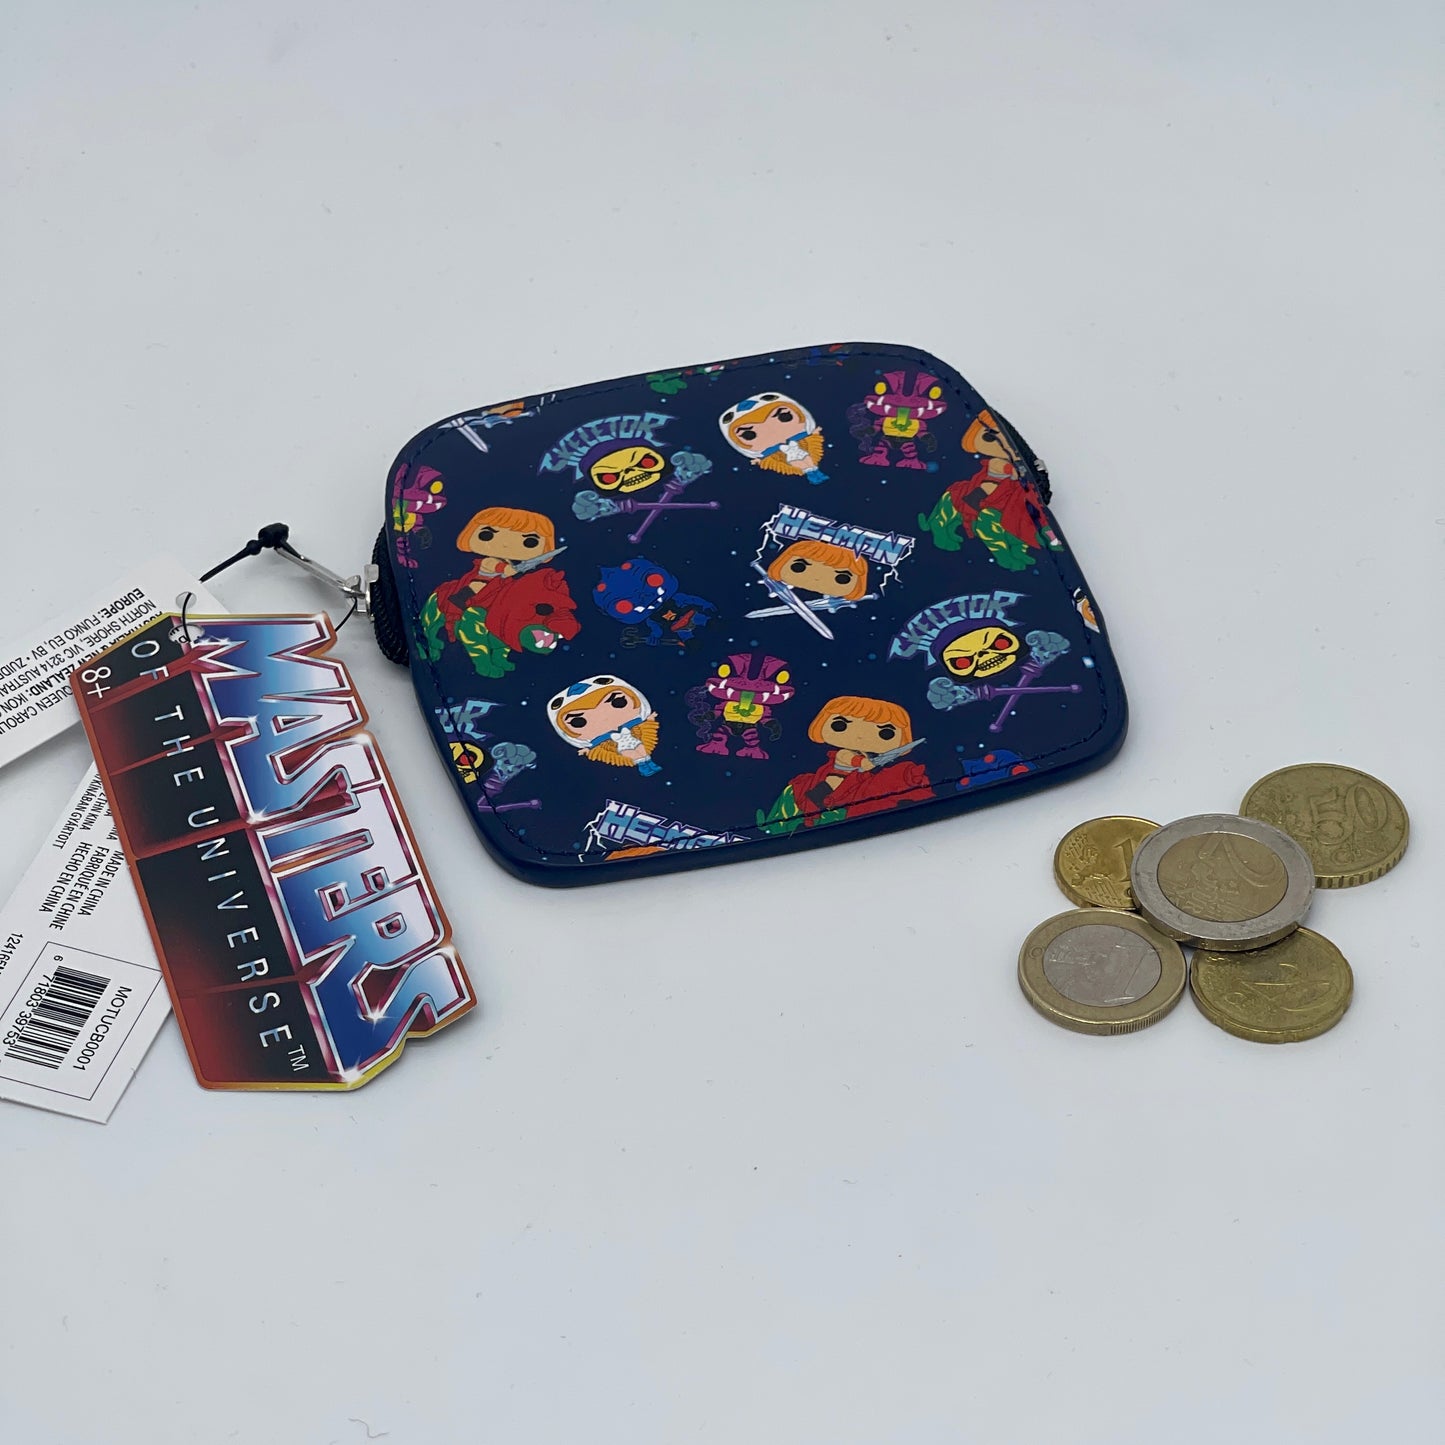 Funko Pop Masters of the Universe wallet / coin pouch - Walmart Exclusive 